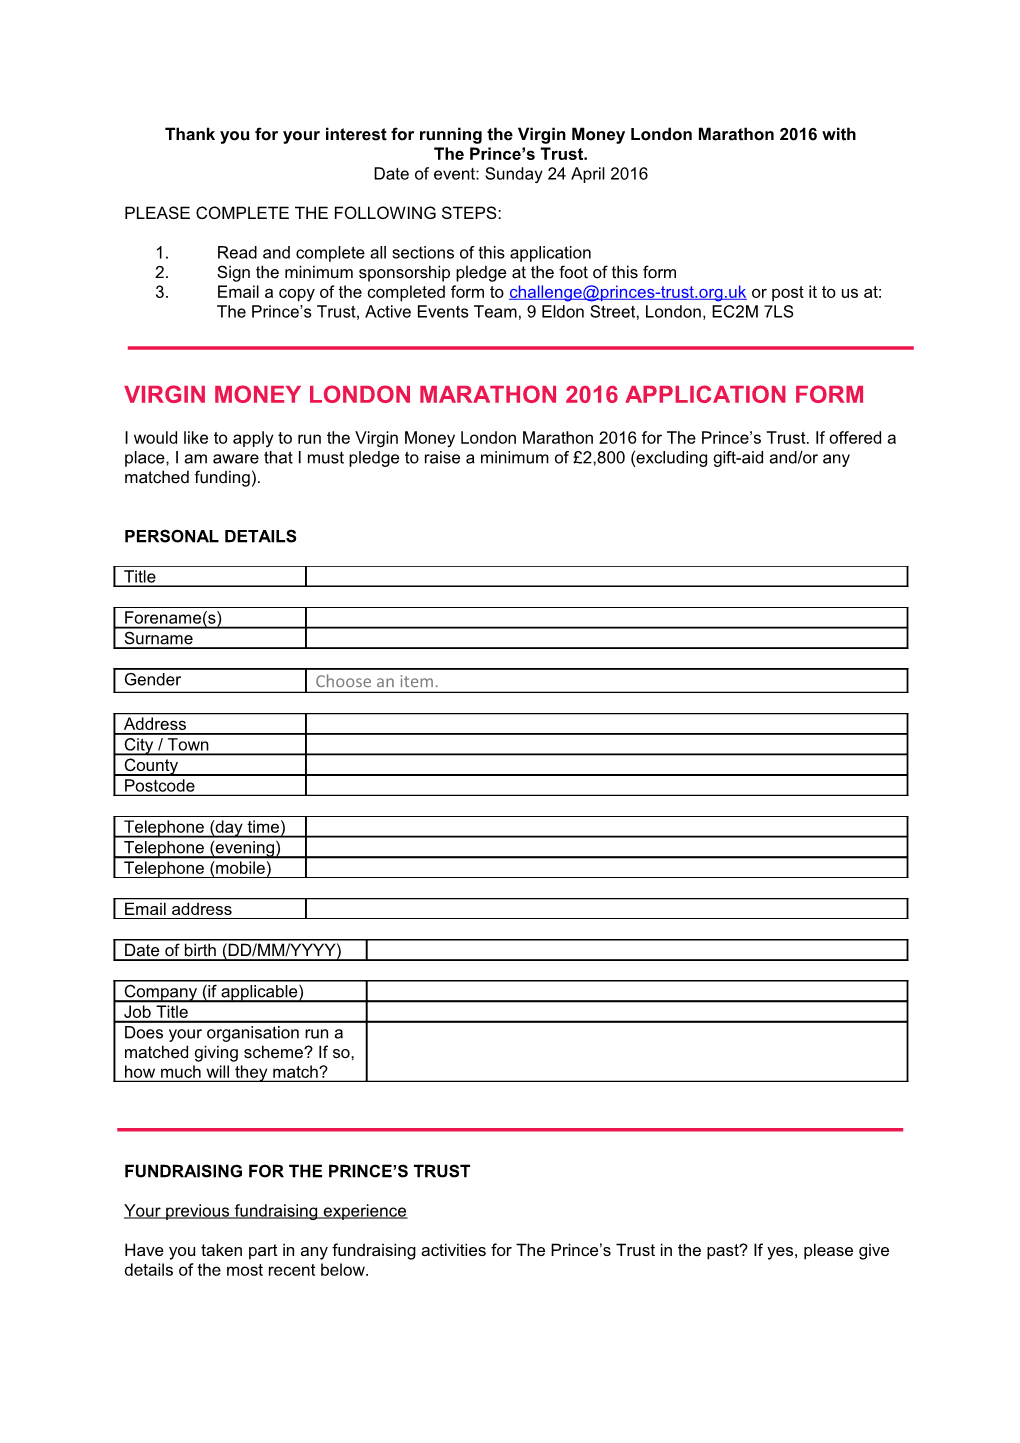 Thank You for Your Interest for Running the Virgin Money London Marathon 2016 With